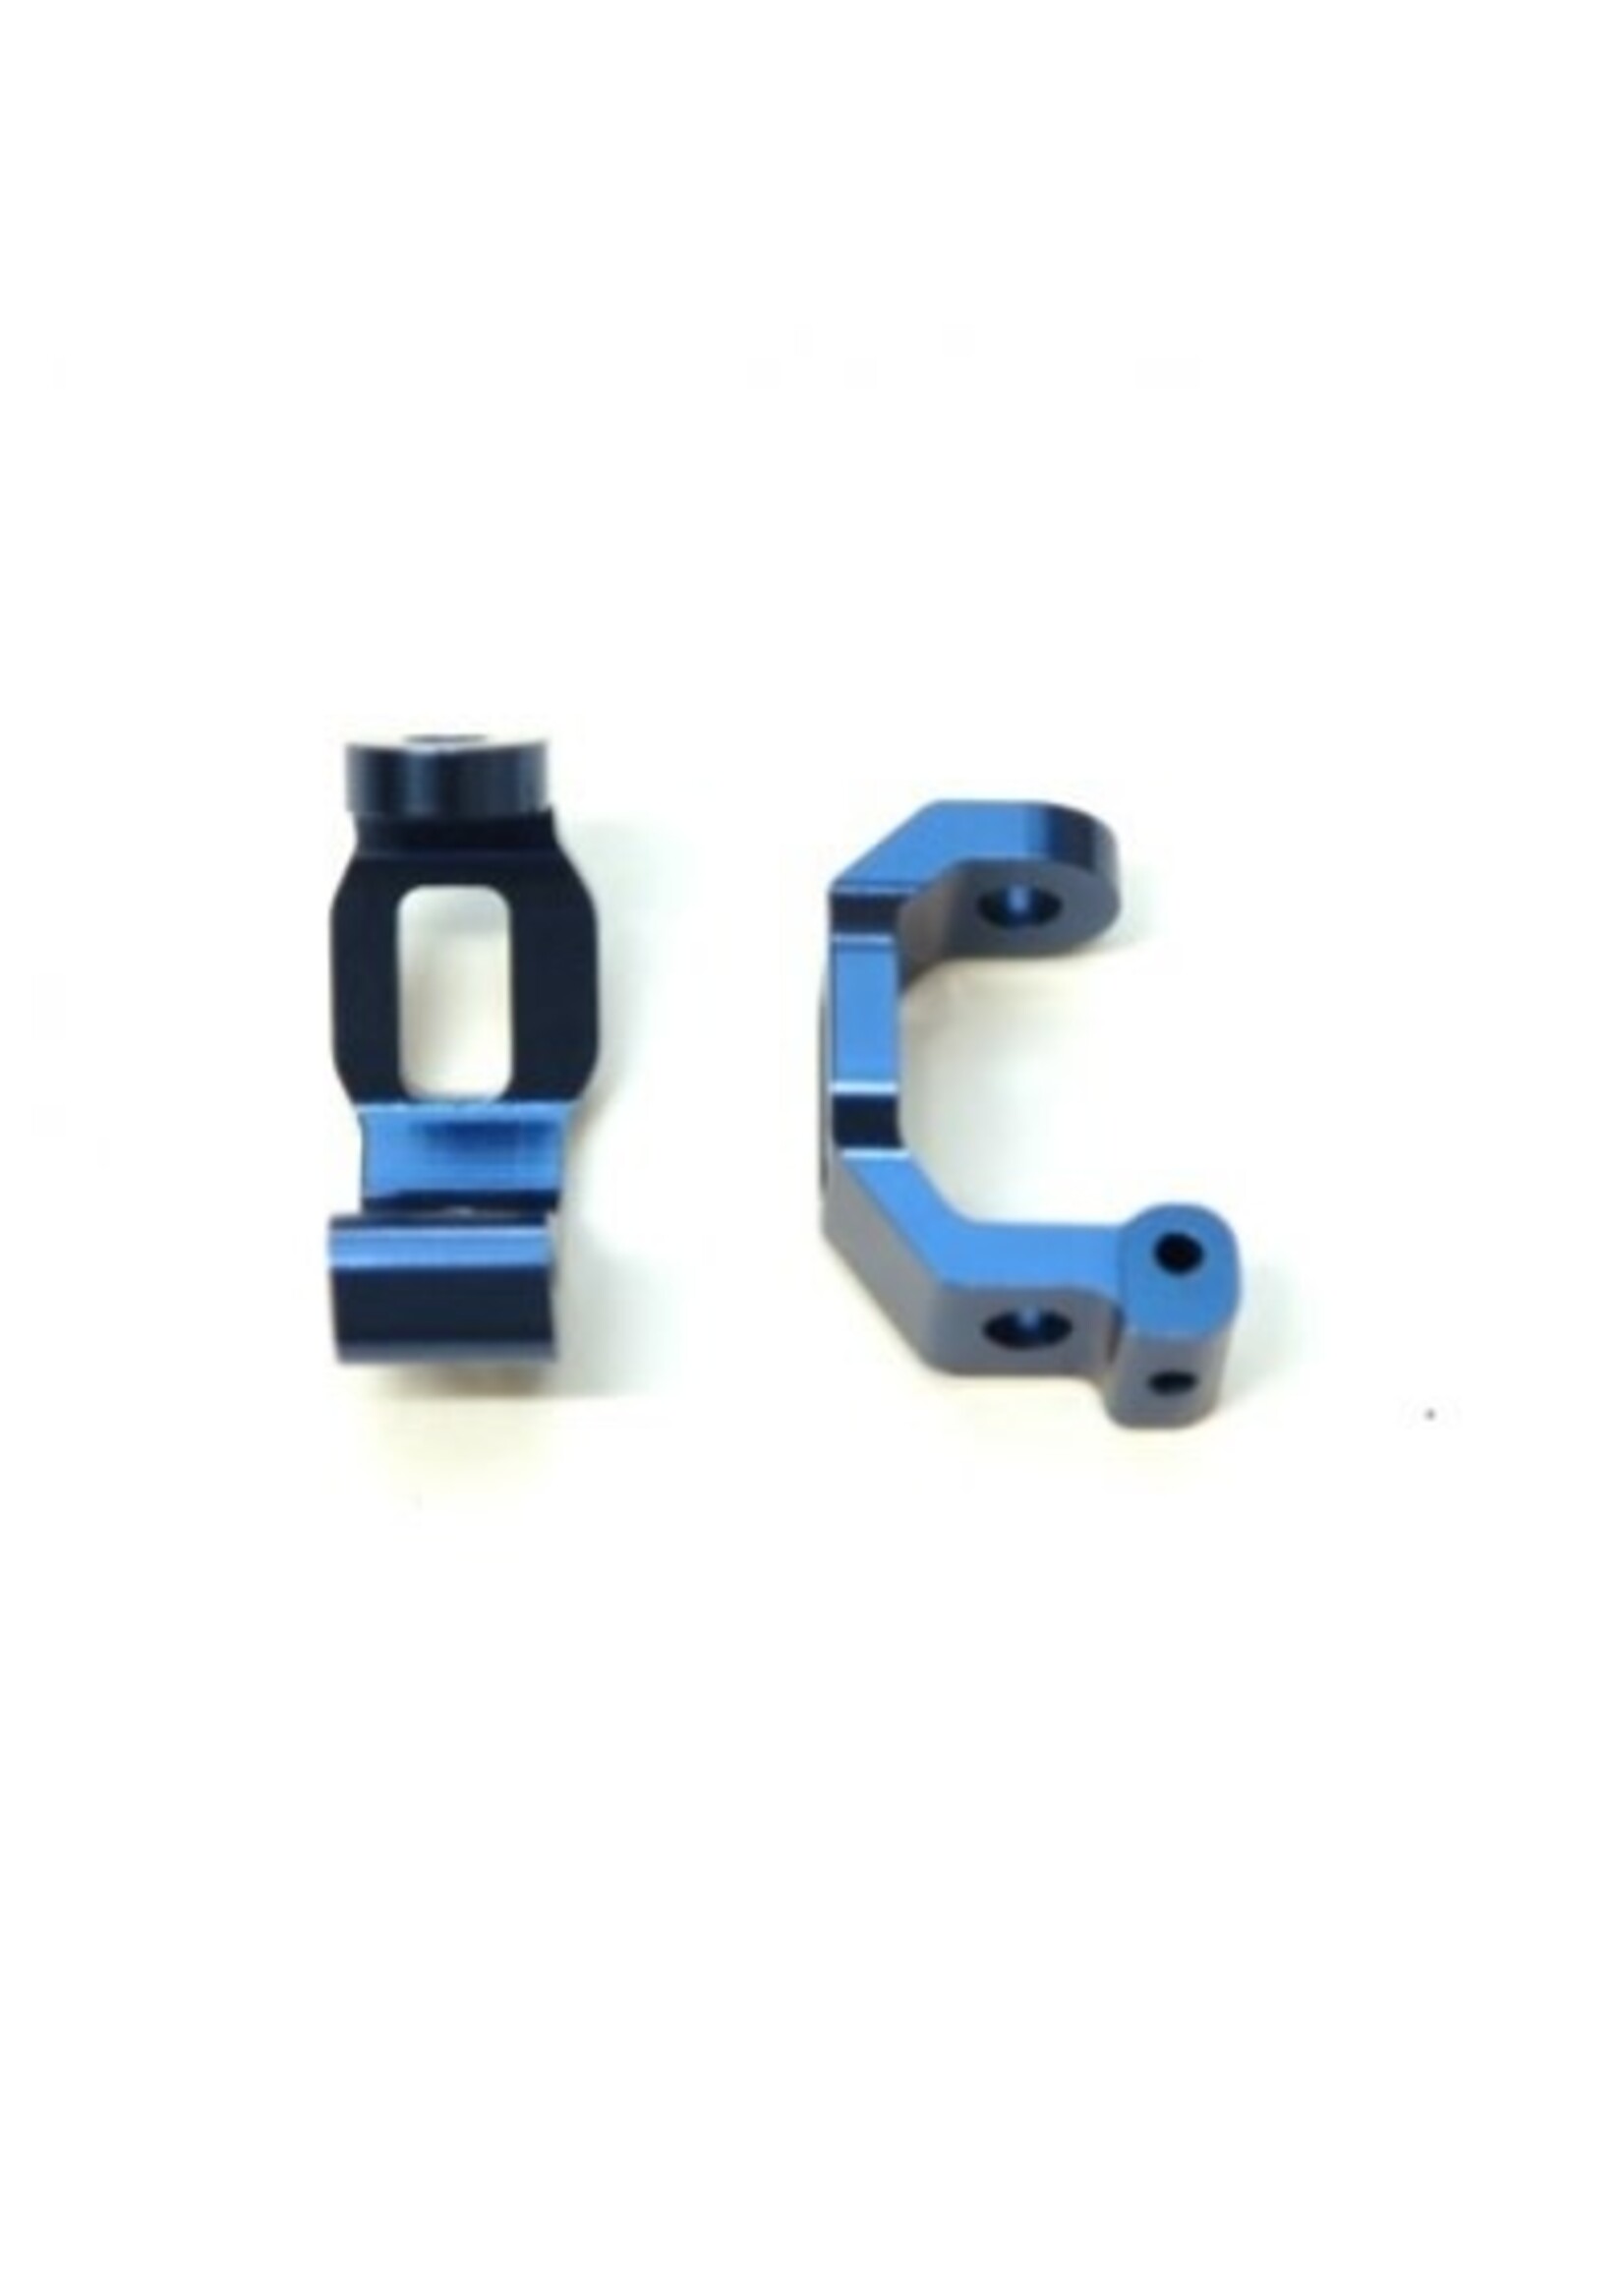 ST Racing Concepts ST8332B STRC CNC Machined Alum. HD Front Caster Blocks (1 pair) for Traxxas 4Tec 2.0 (Blue)